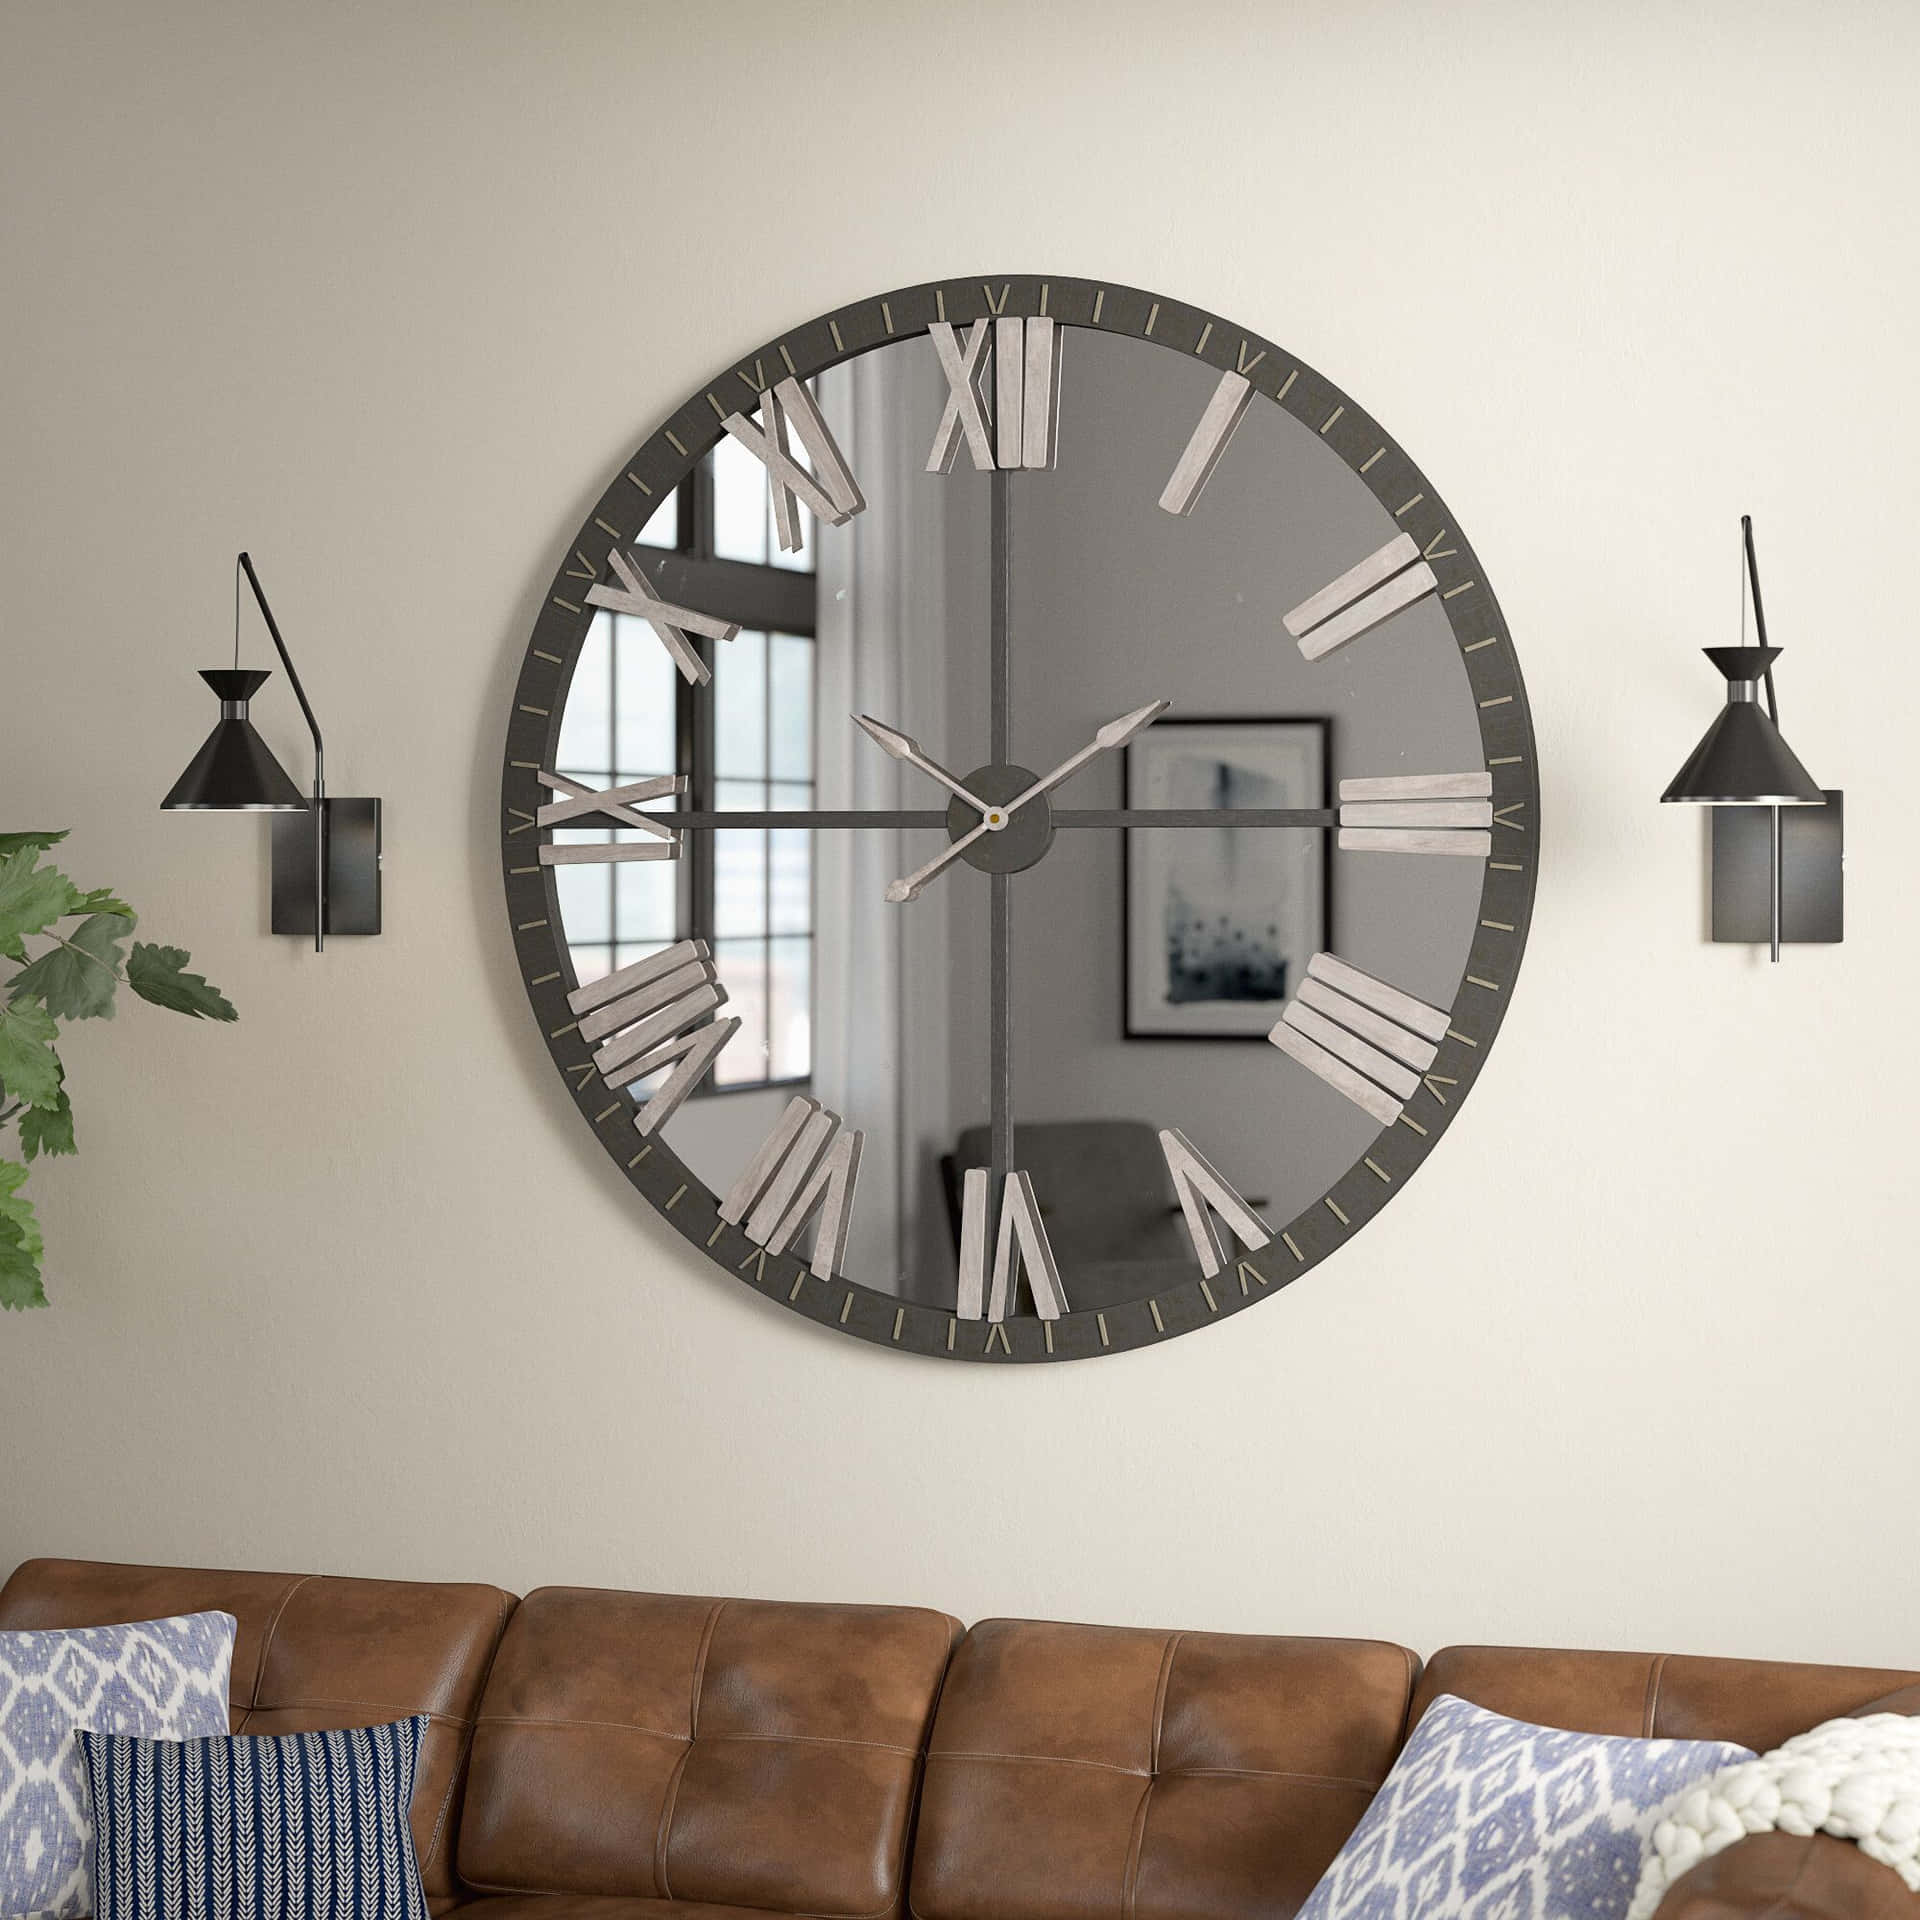 A classic analog wall clock transporting you back in time.